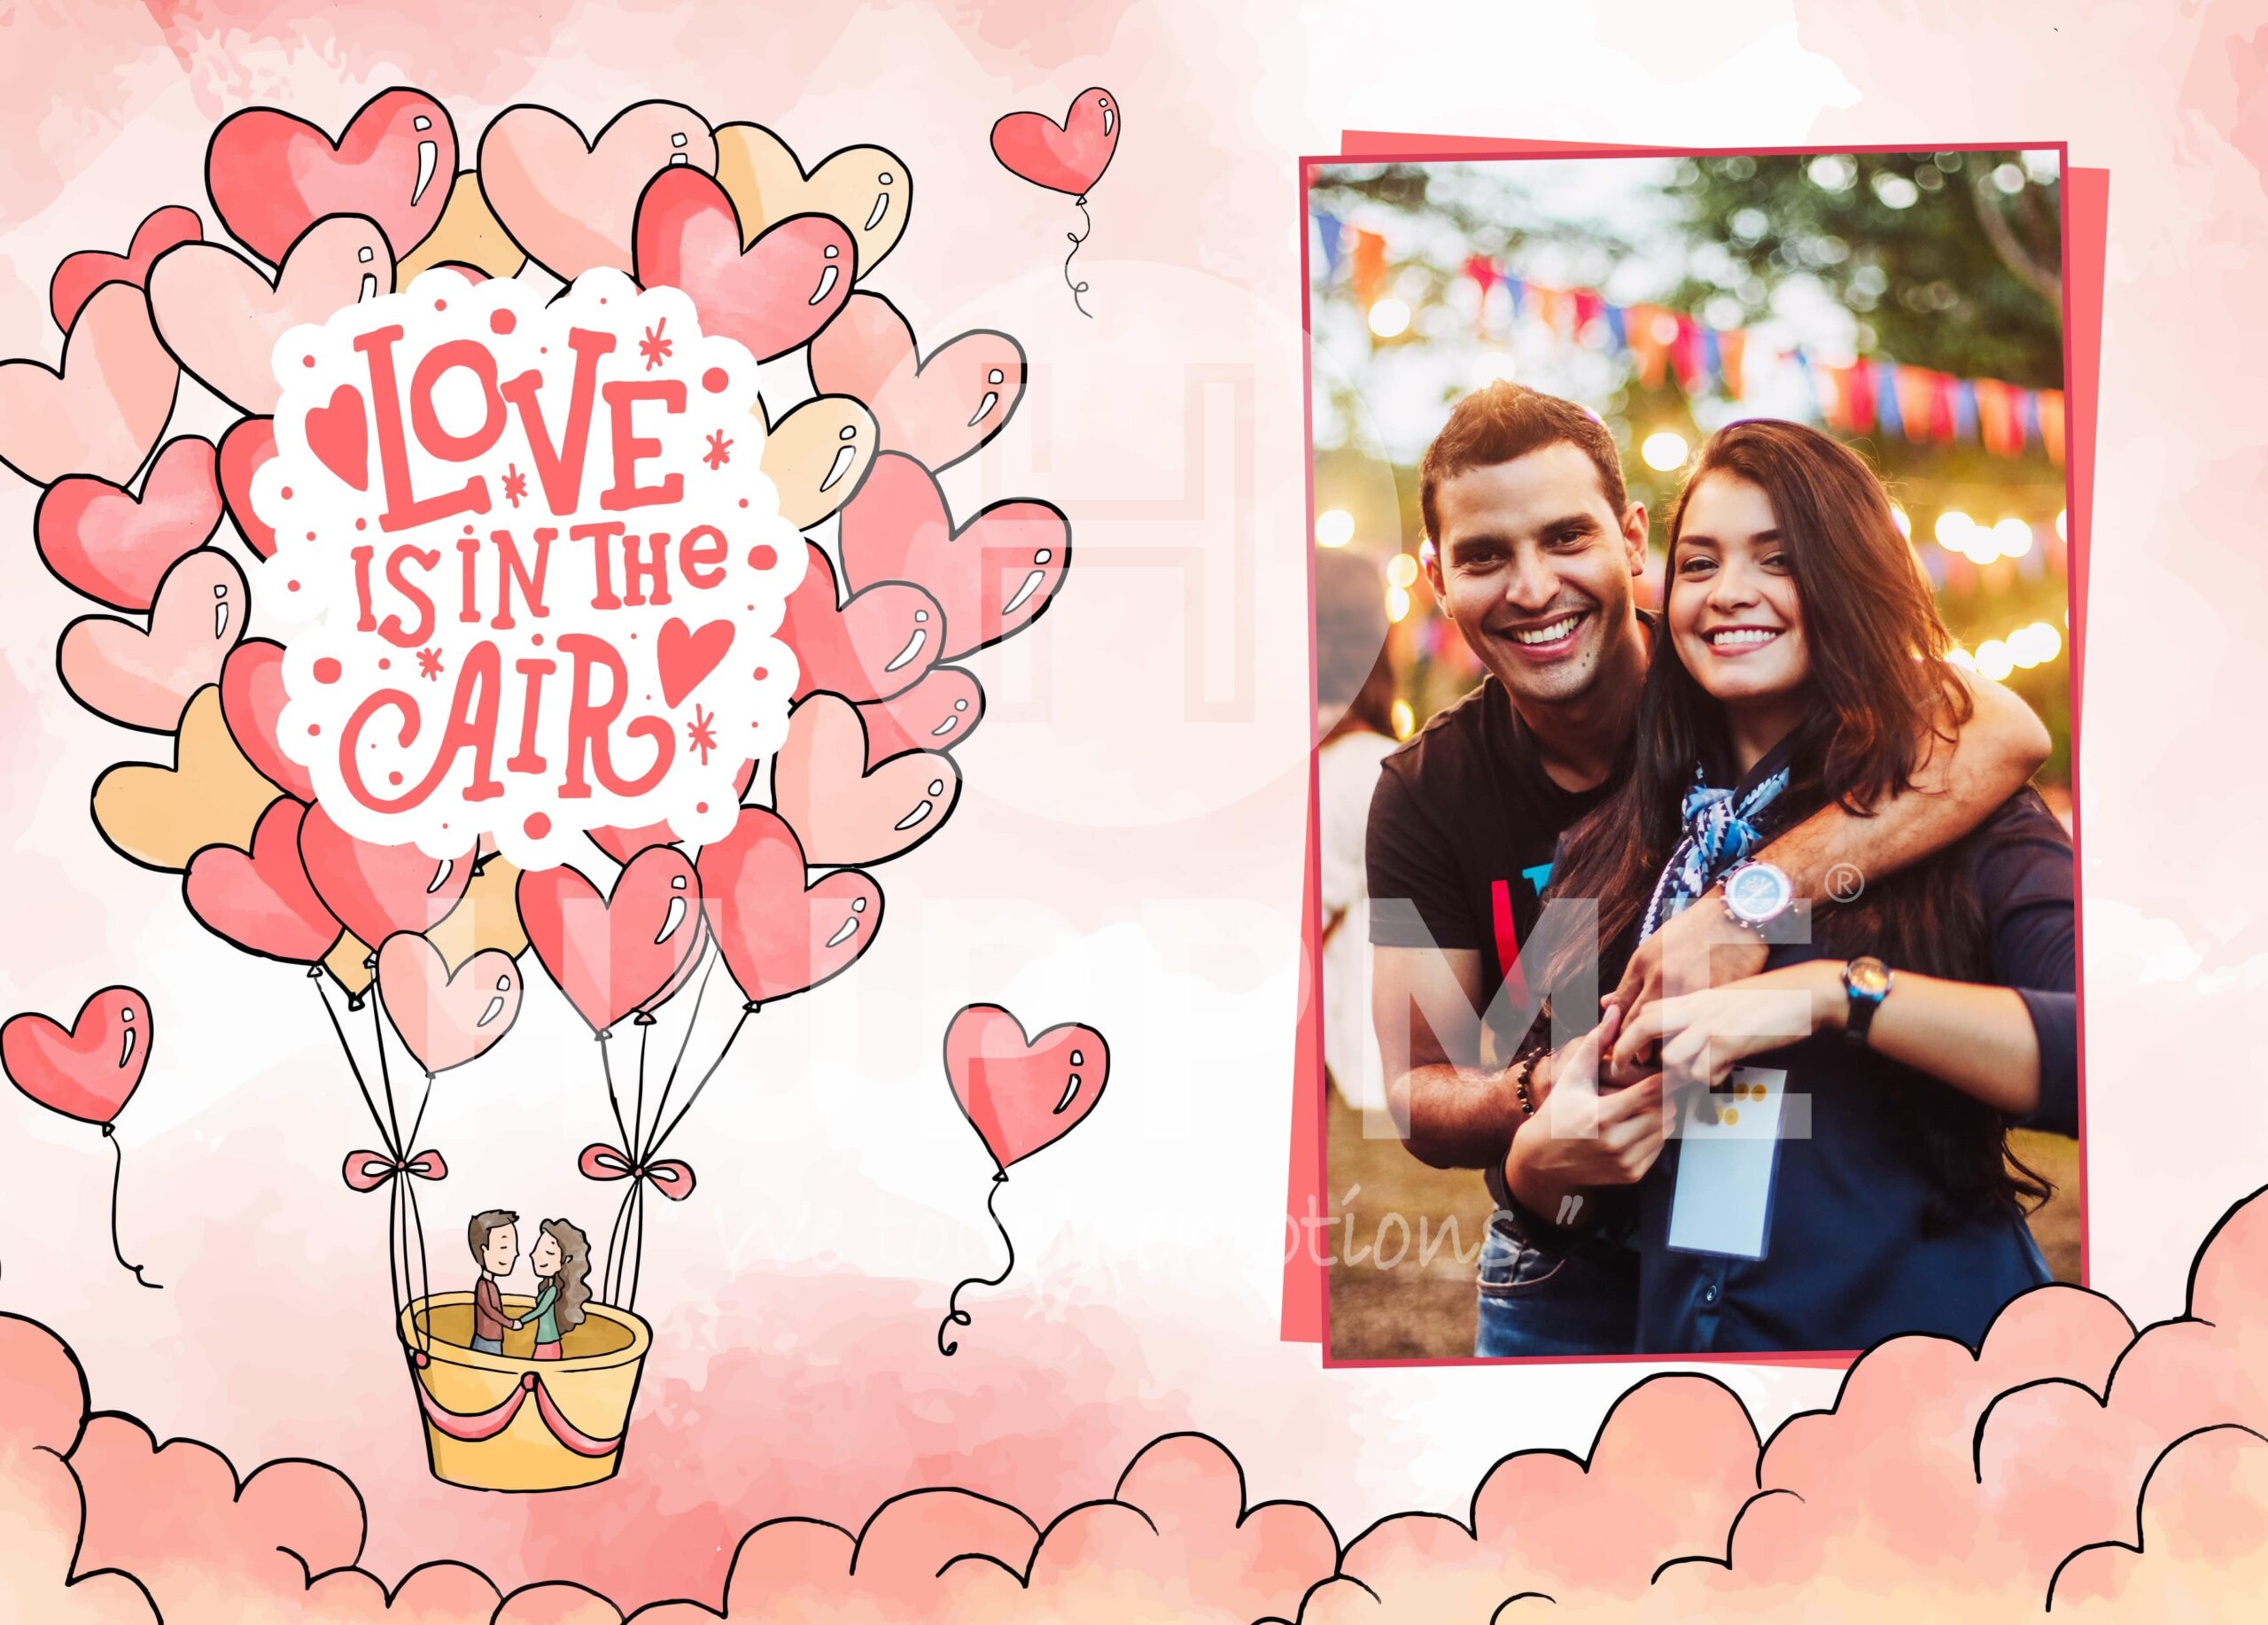 Lovebook - Personalized Romantic Gift | Buy online at Huppme